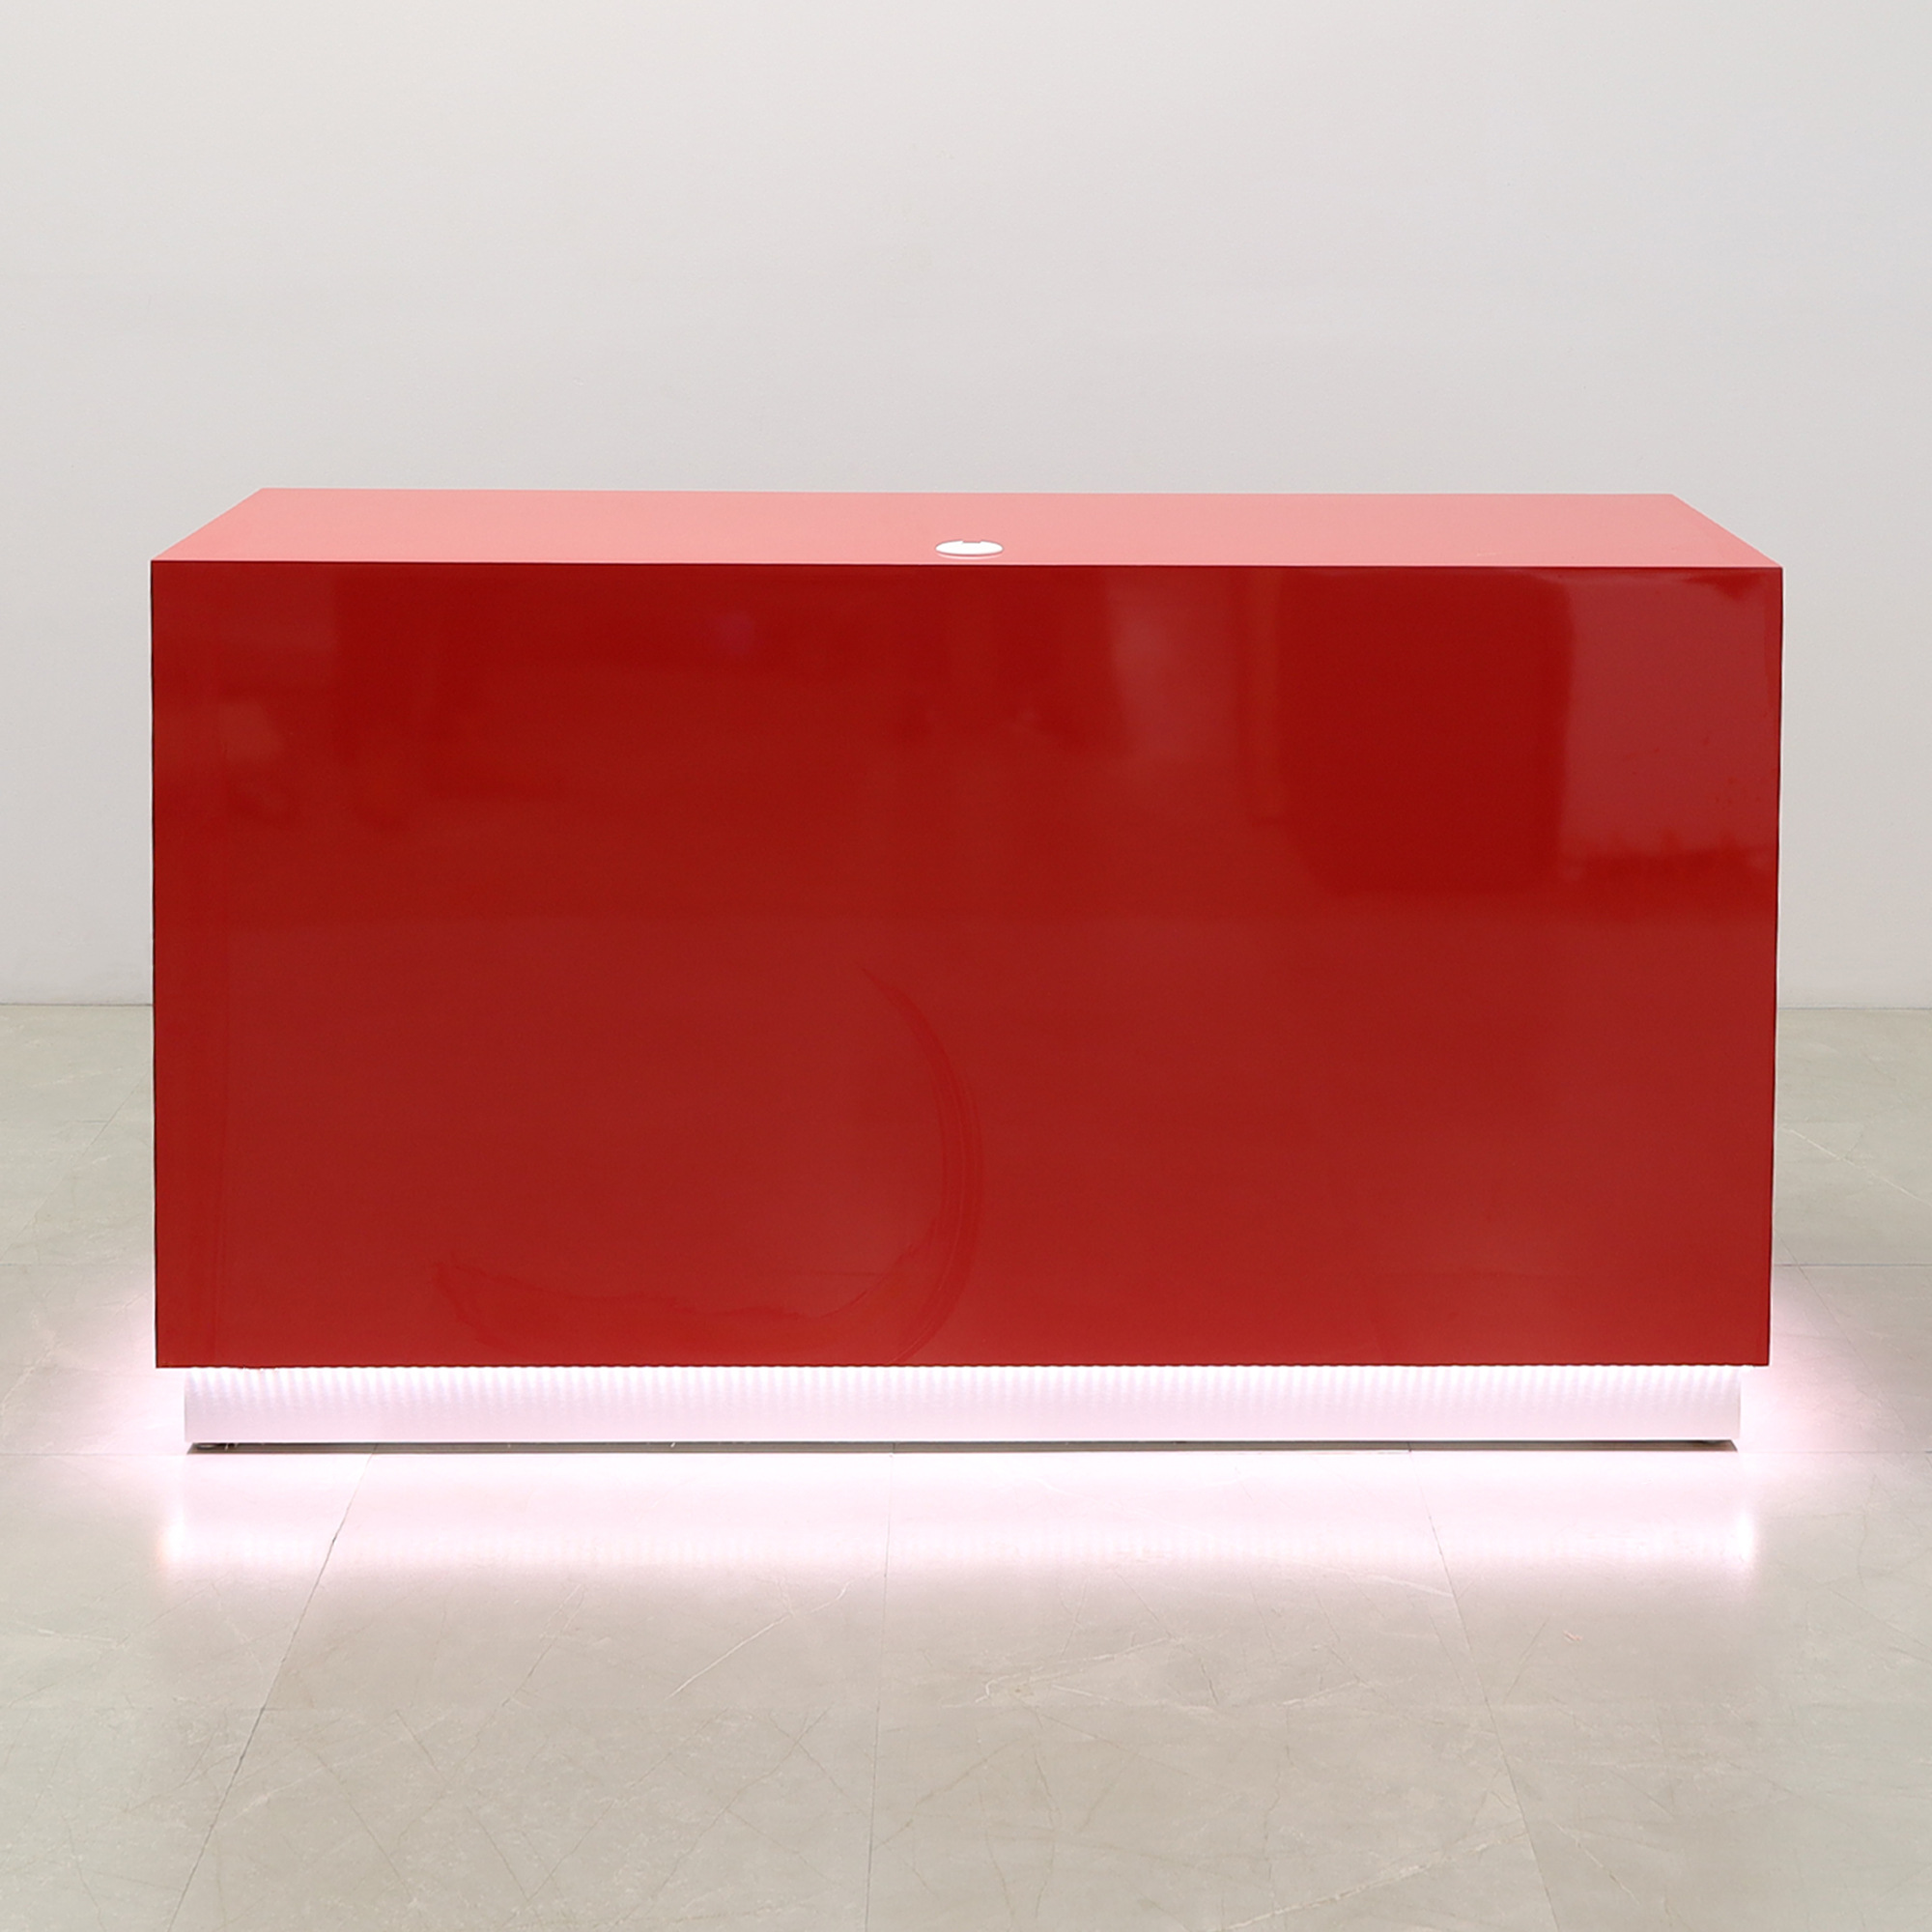 72-inch Houston Custom Reception Desk in classic red gloss laminate main desk and brushed aluminum toe-kick, with white LED, shown here.